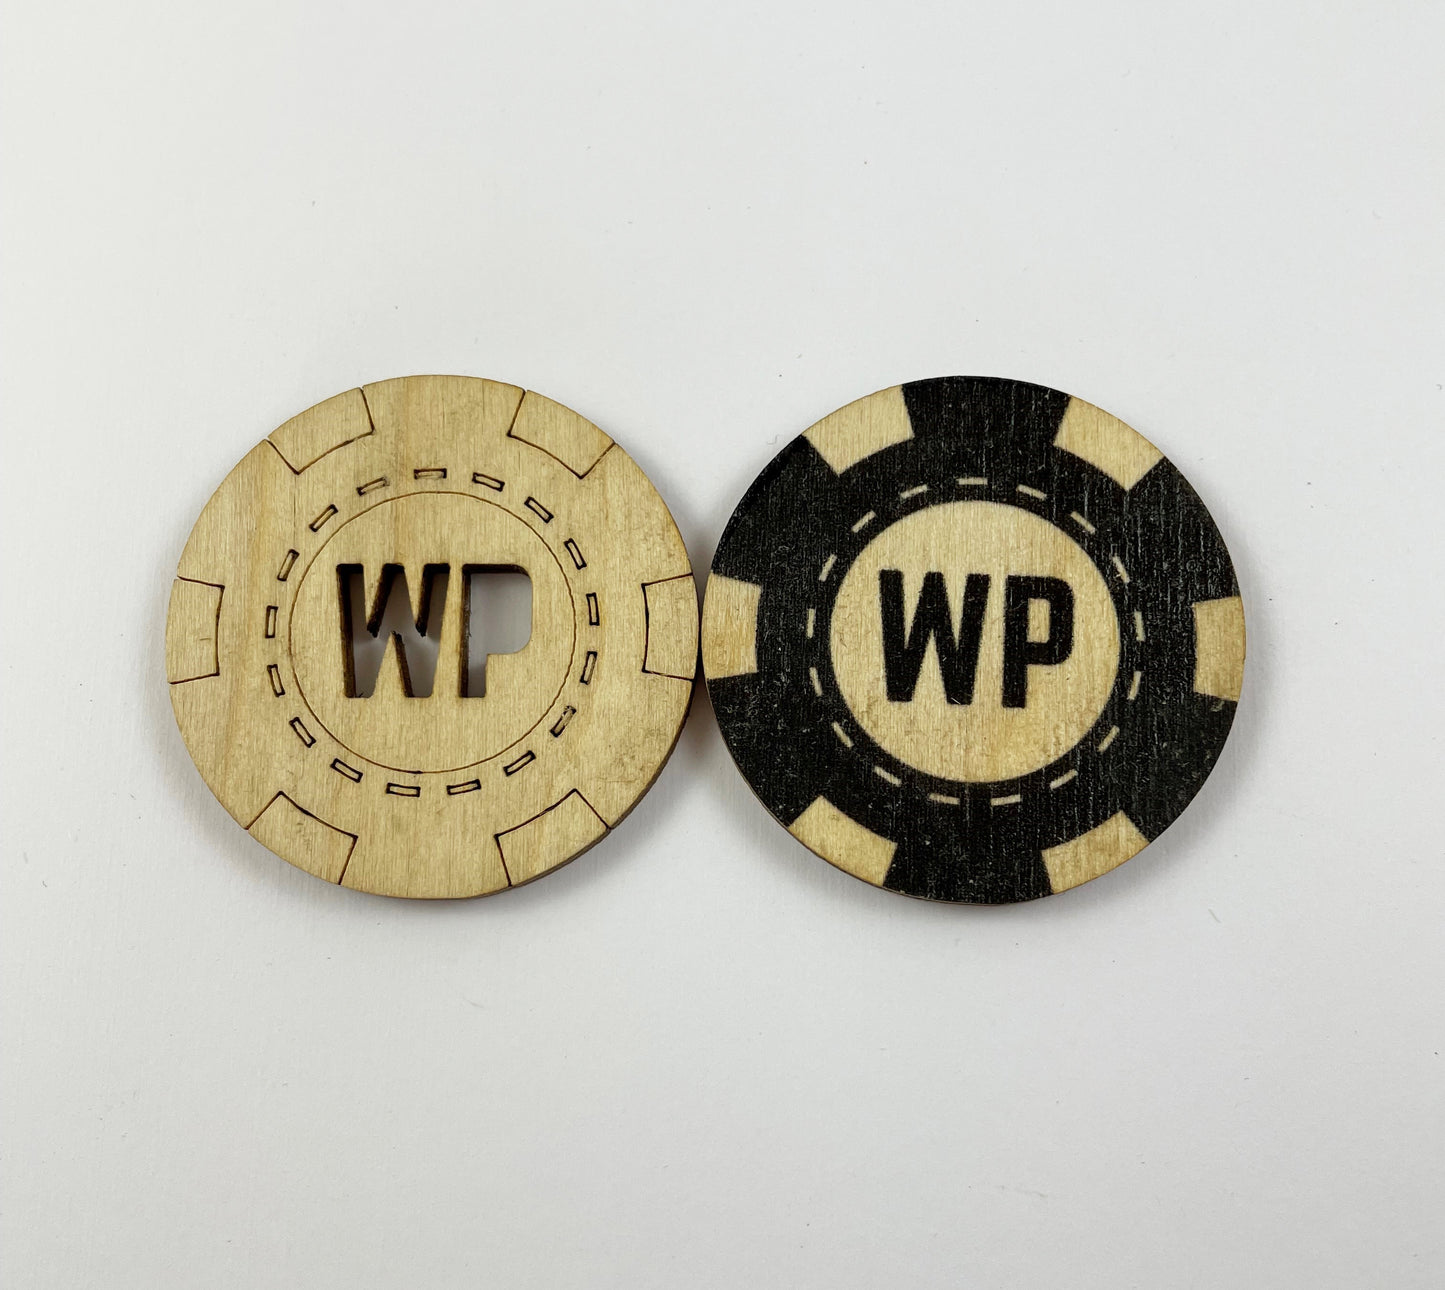 Personalised Wooden Poker Chips